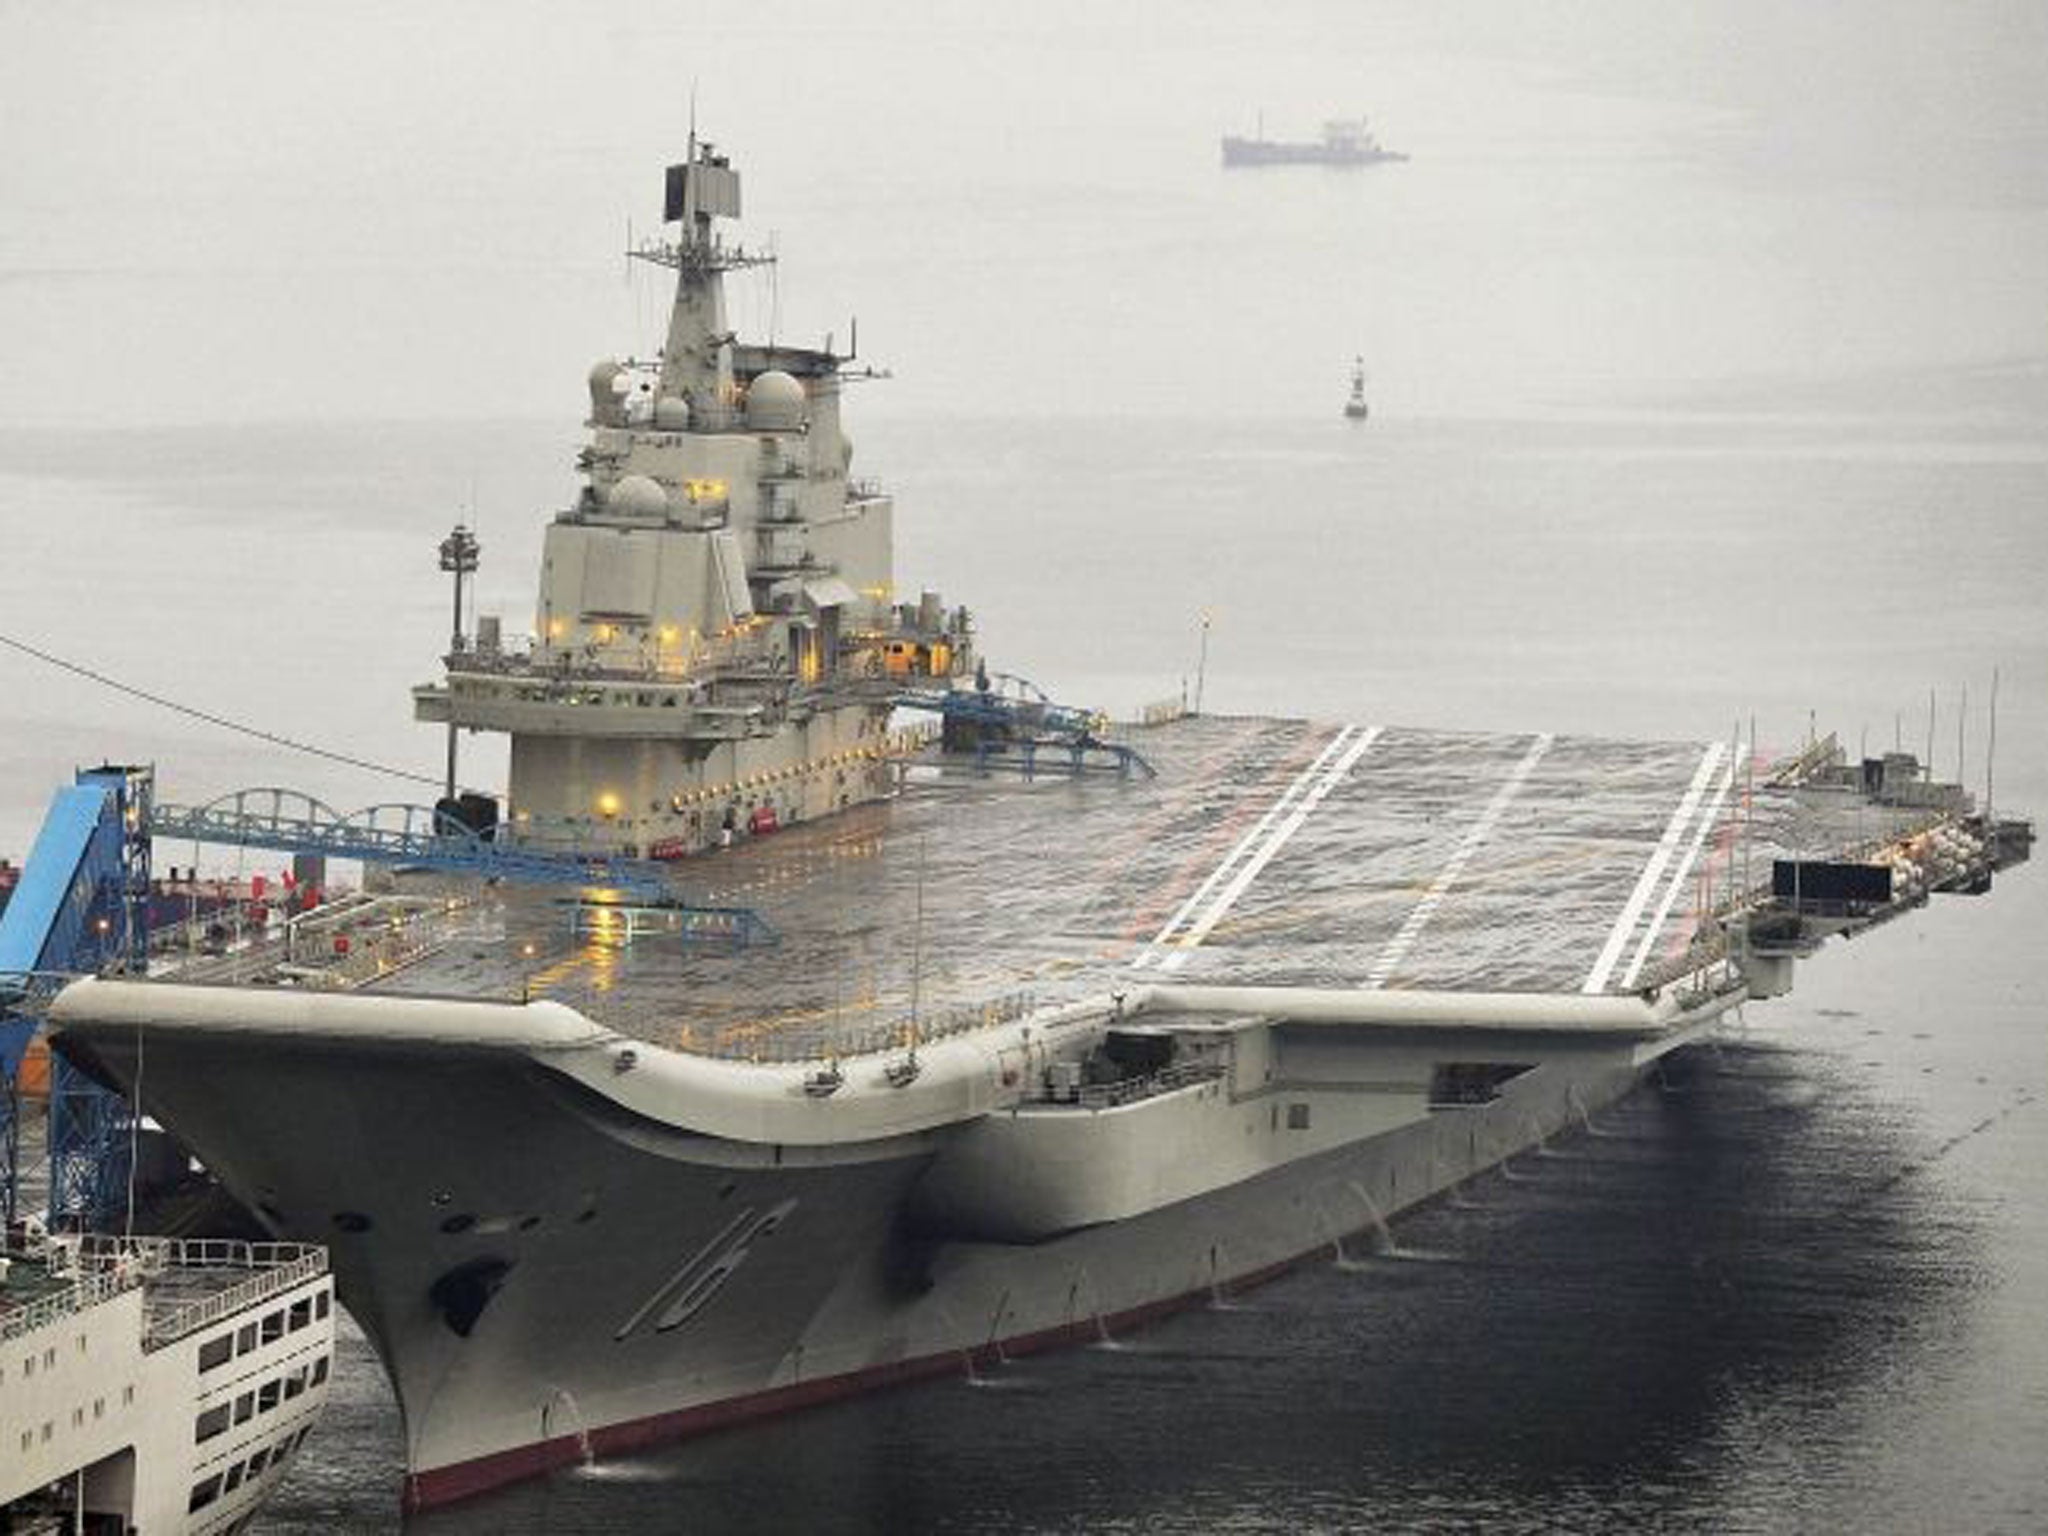 The Liaoning docked at Dalian Port in December 2013